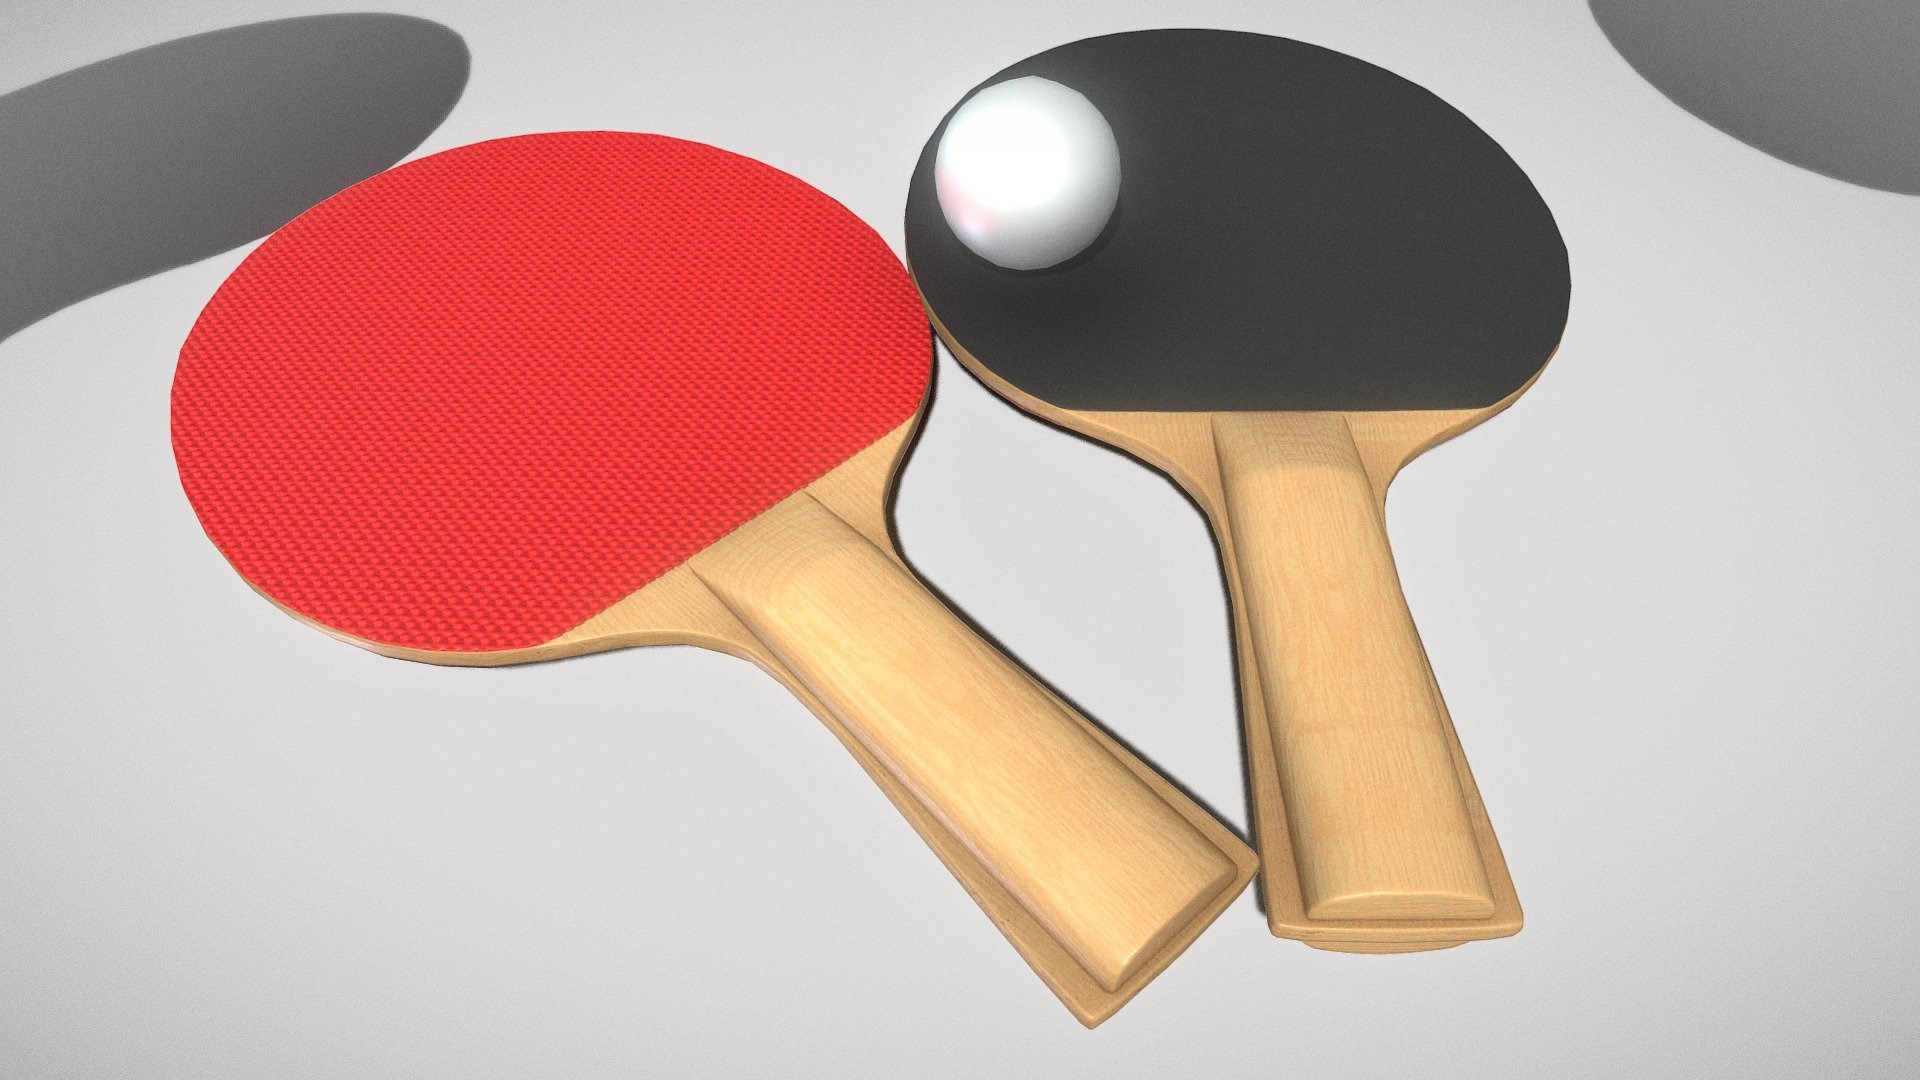 Premium Vector | Engraving illustration of ping pong table tennis racket  and ball